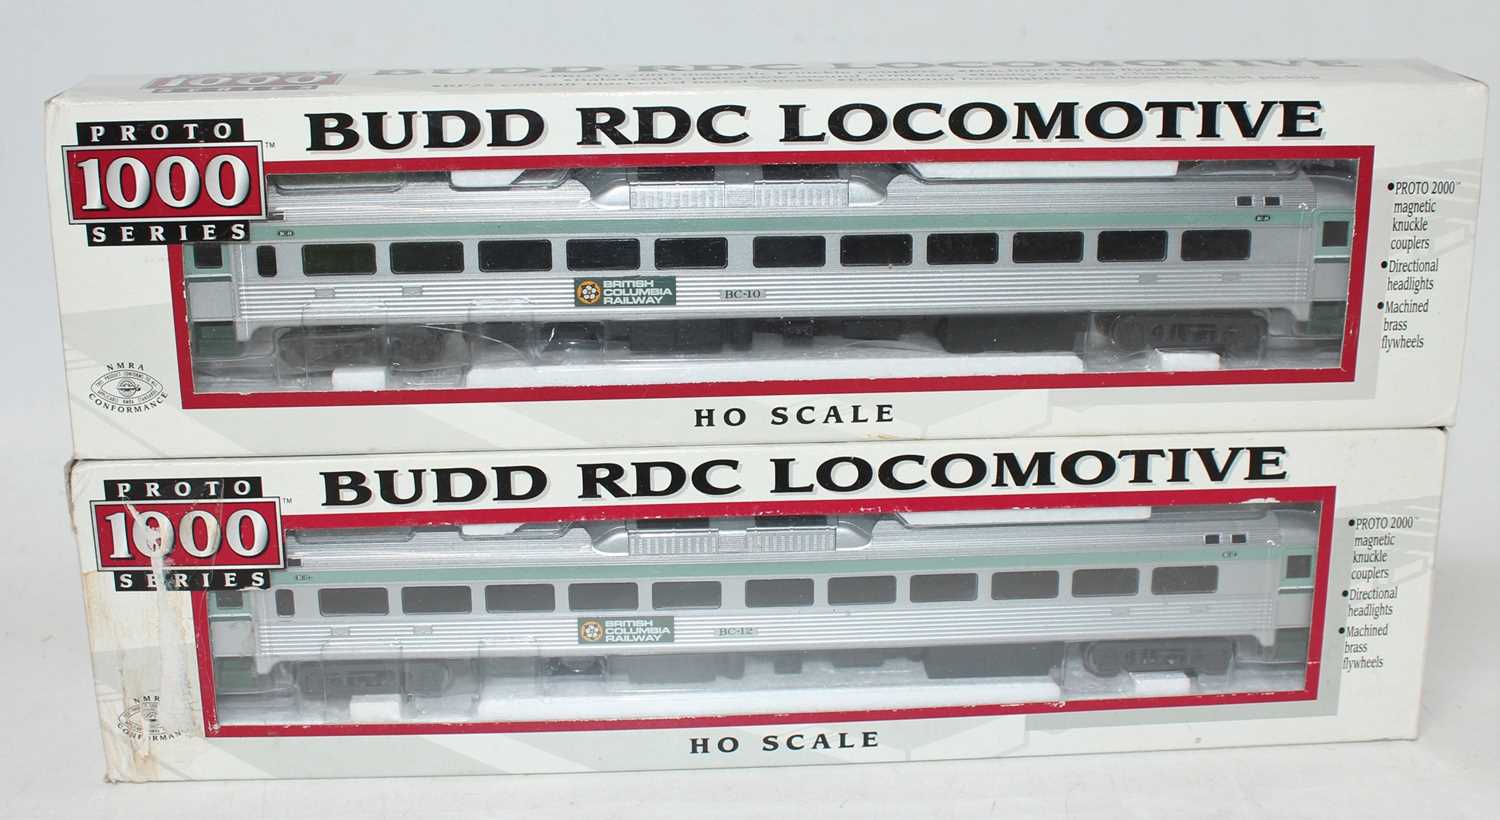 A Proto 1000 series Budd RDC locomotive group, two examples to include a BC-12 British Columbia